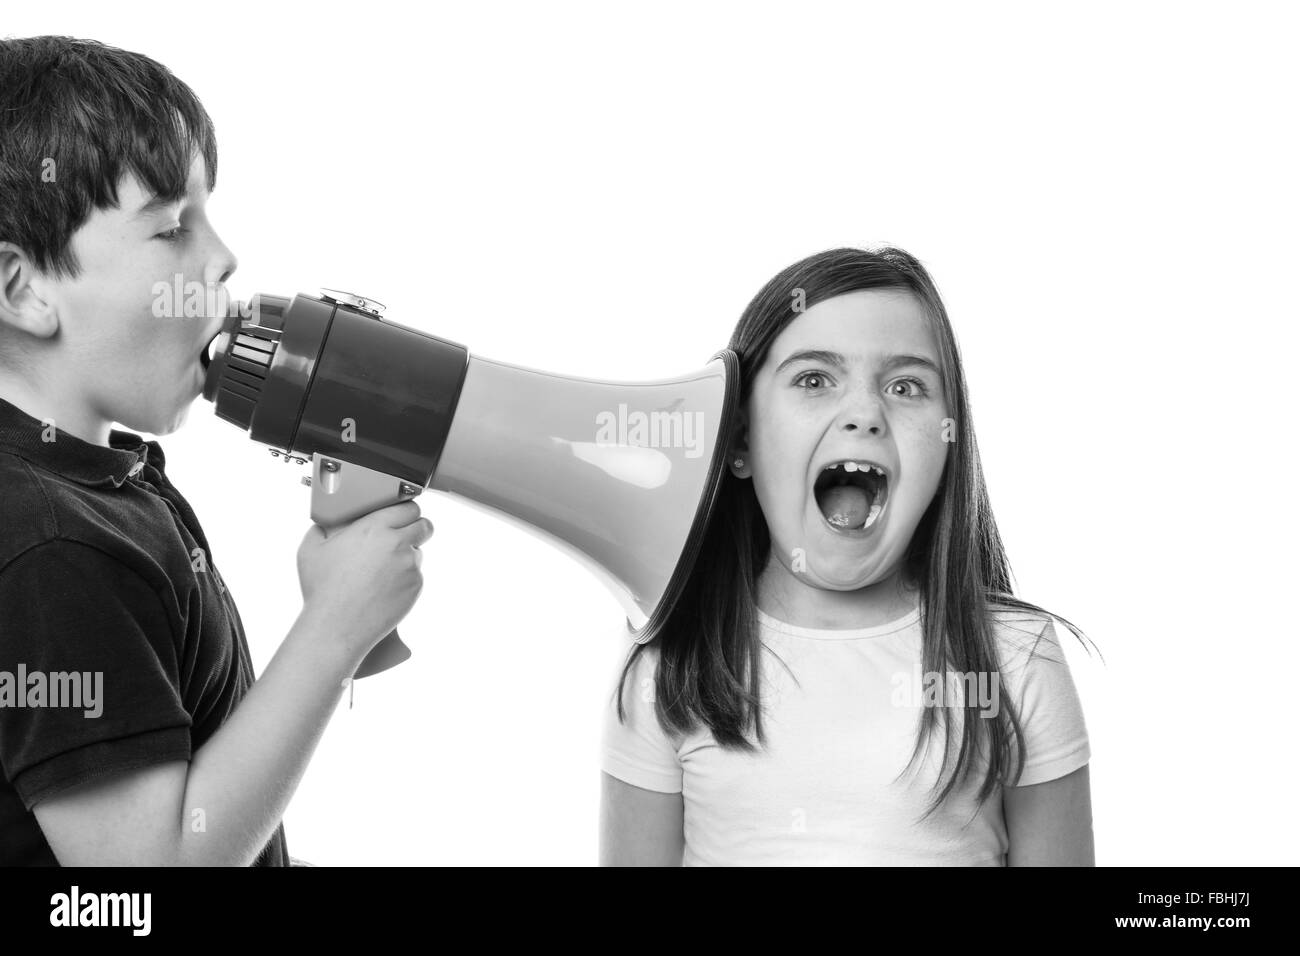 young boy using s megaphone to speak to his friend Stock Photo